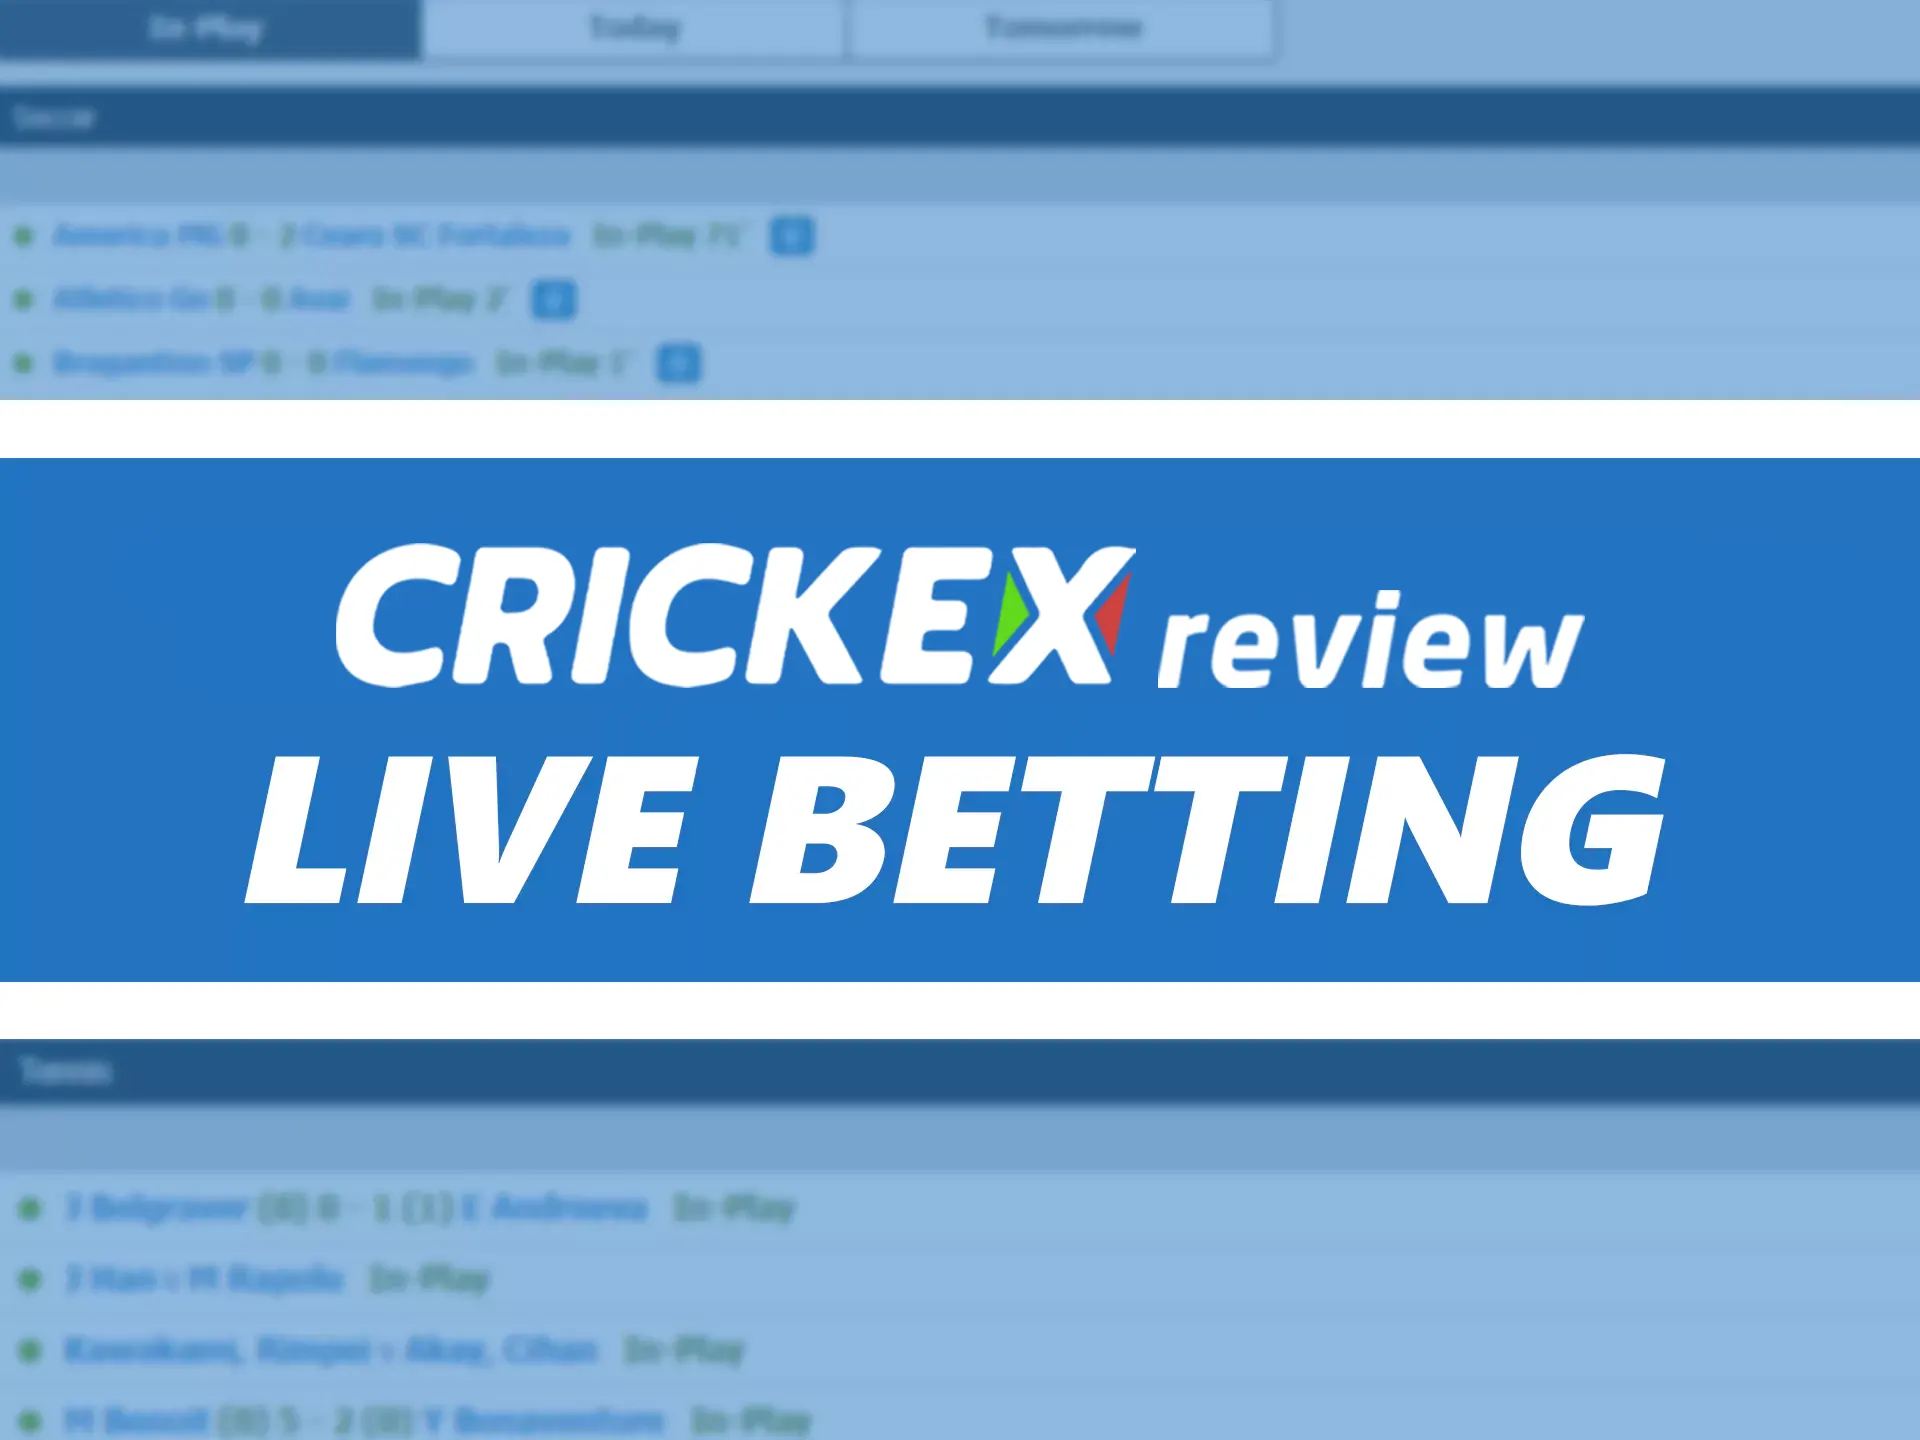 Bet on live matches at Crickex.